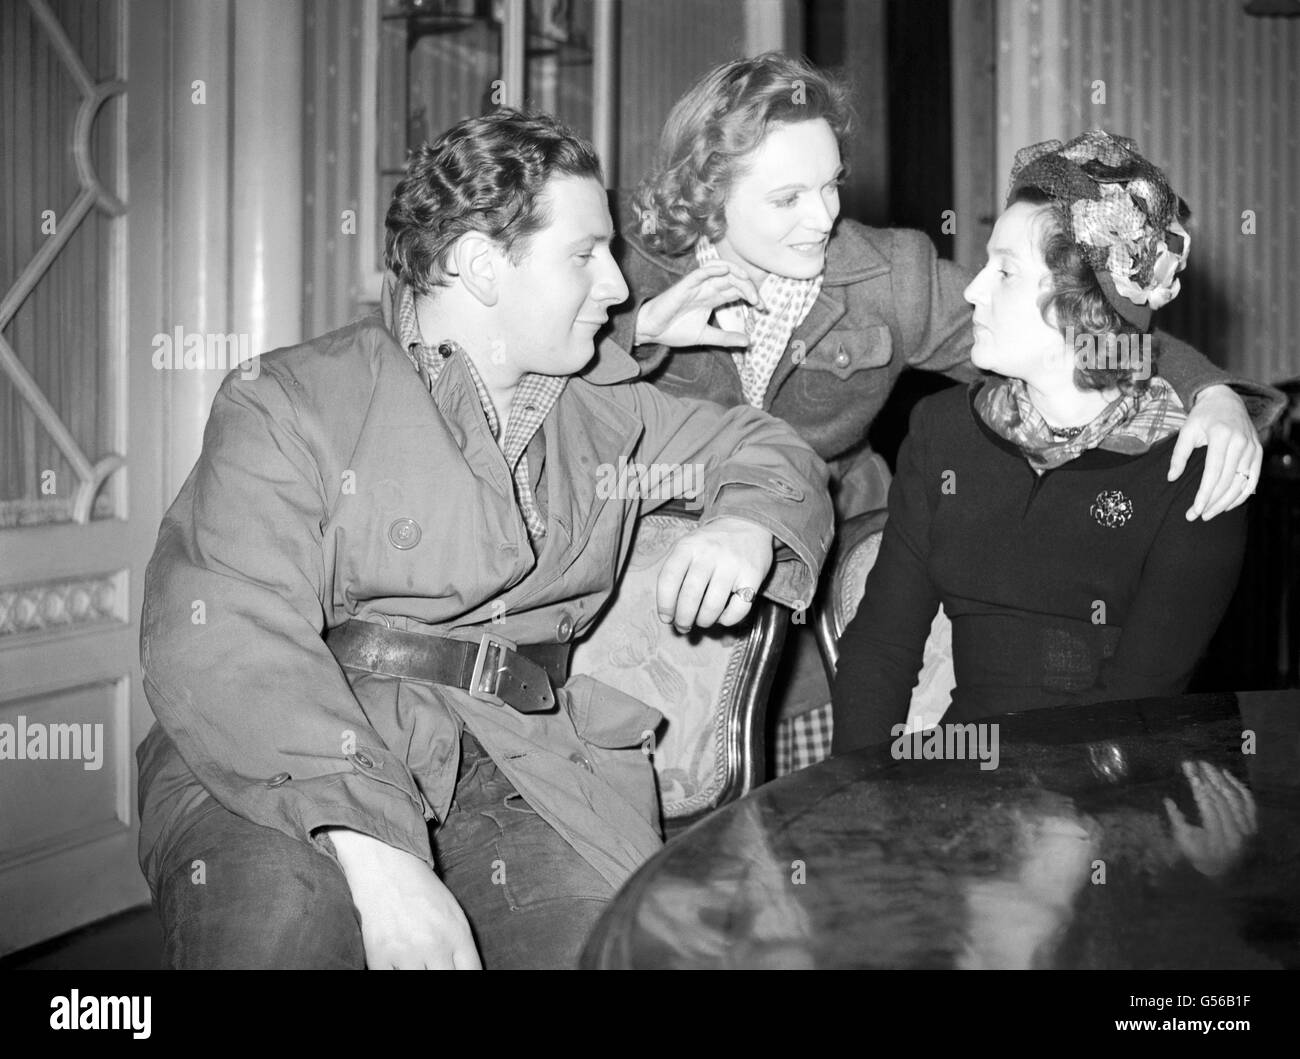 Left to right, actor Peter Ustinov, Anna Neagle, and Odette Churchill at Borehamwood on the set of 'Odette, G.C'. The film is based on the wartime exploits of Mrs Churchill - then Mrs Odette Sansom - who was awarded the George Cross for her work as a British secret agent in occupied France. She was tortured by the Gestapo when she refused to betray her commanding officer, Captain Peter Churchill (whom she married afterwards). In the film the part is played by Anna Neagle and the part of Captain Churchill is played by Trevor Howard. Stock Photo